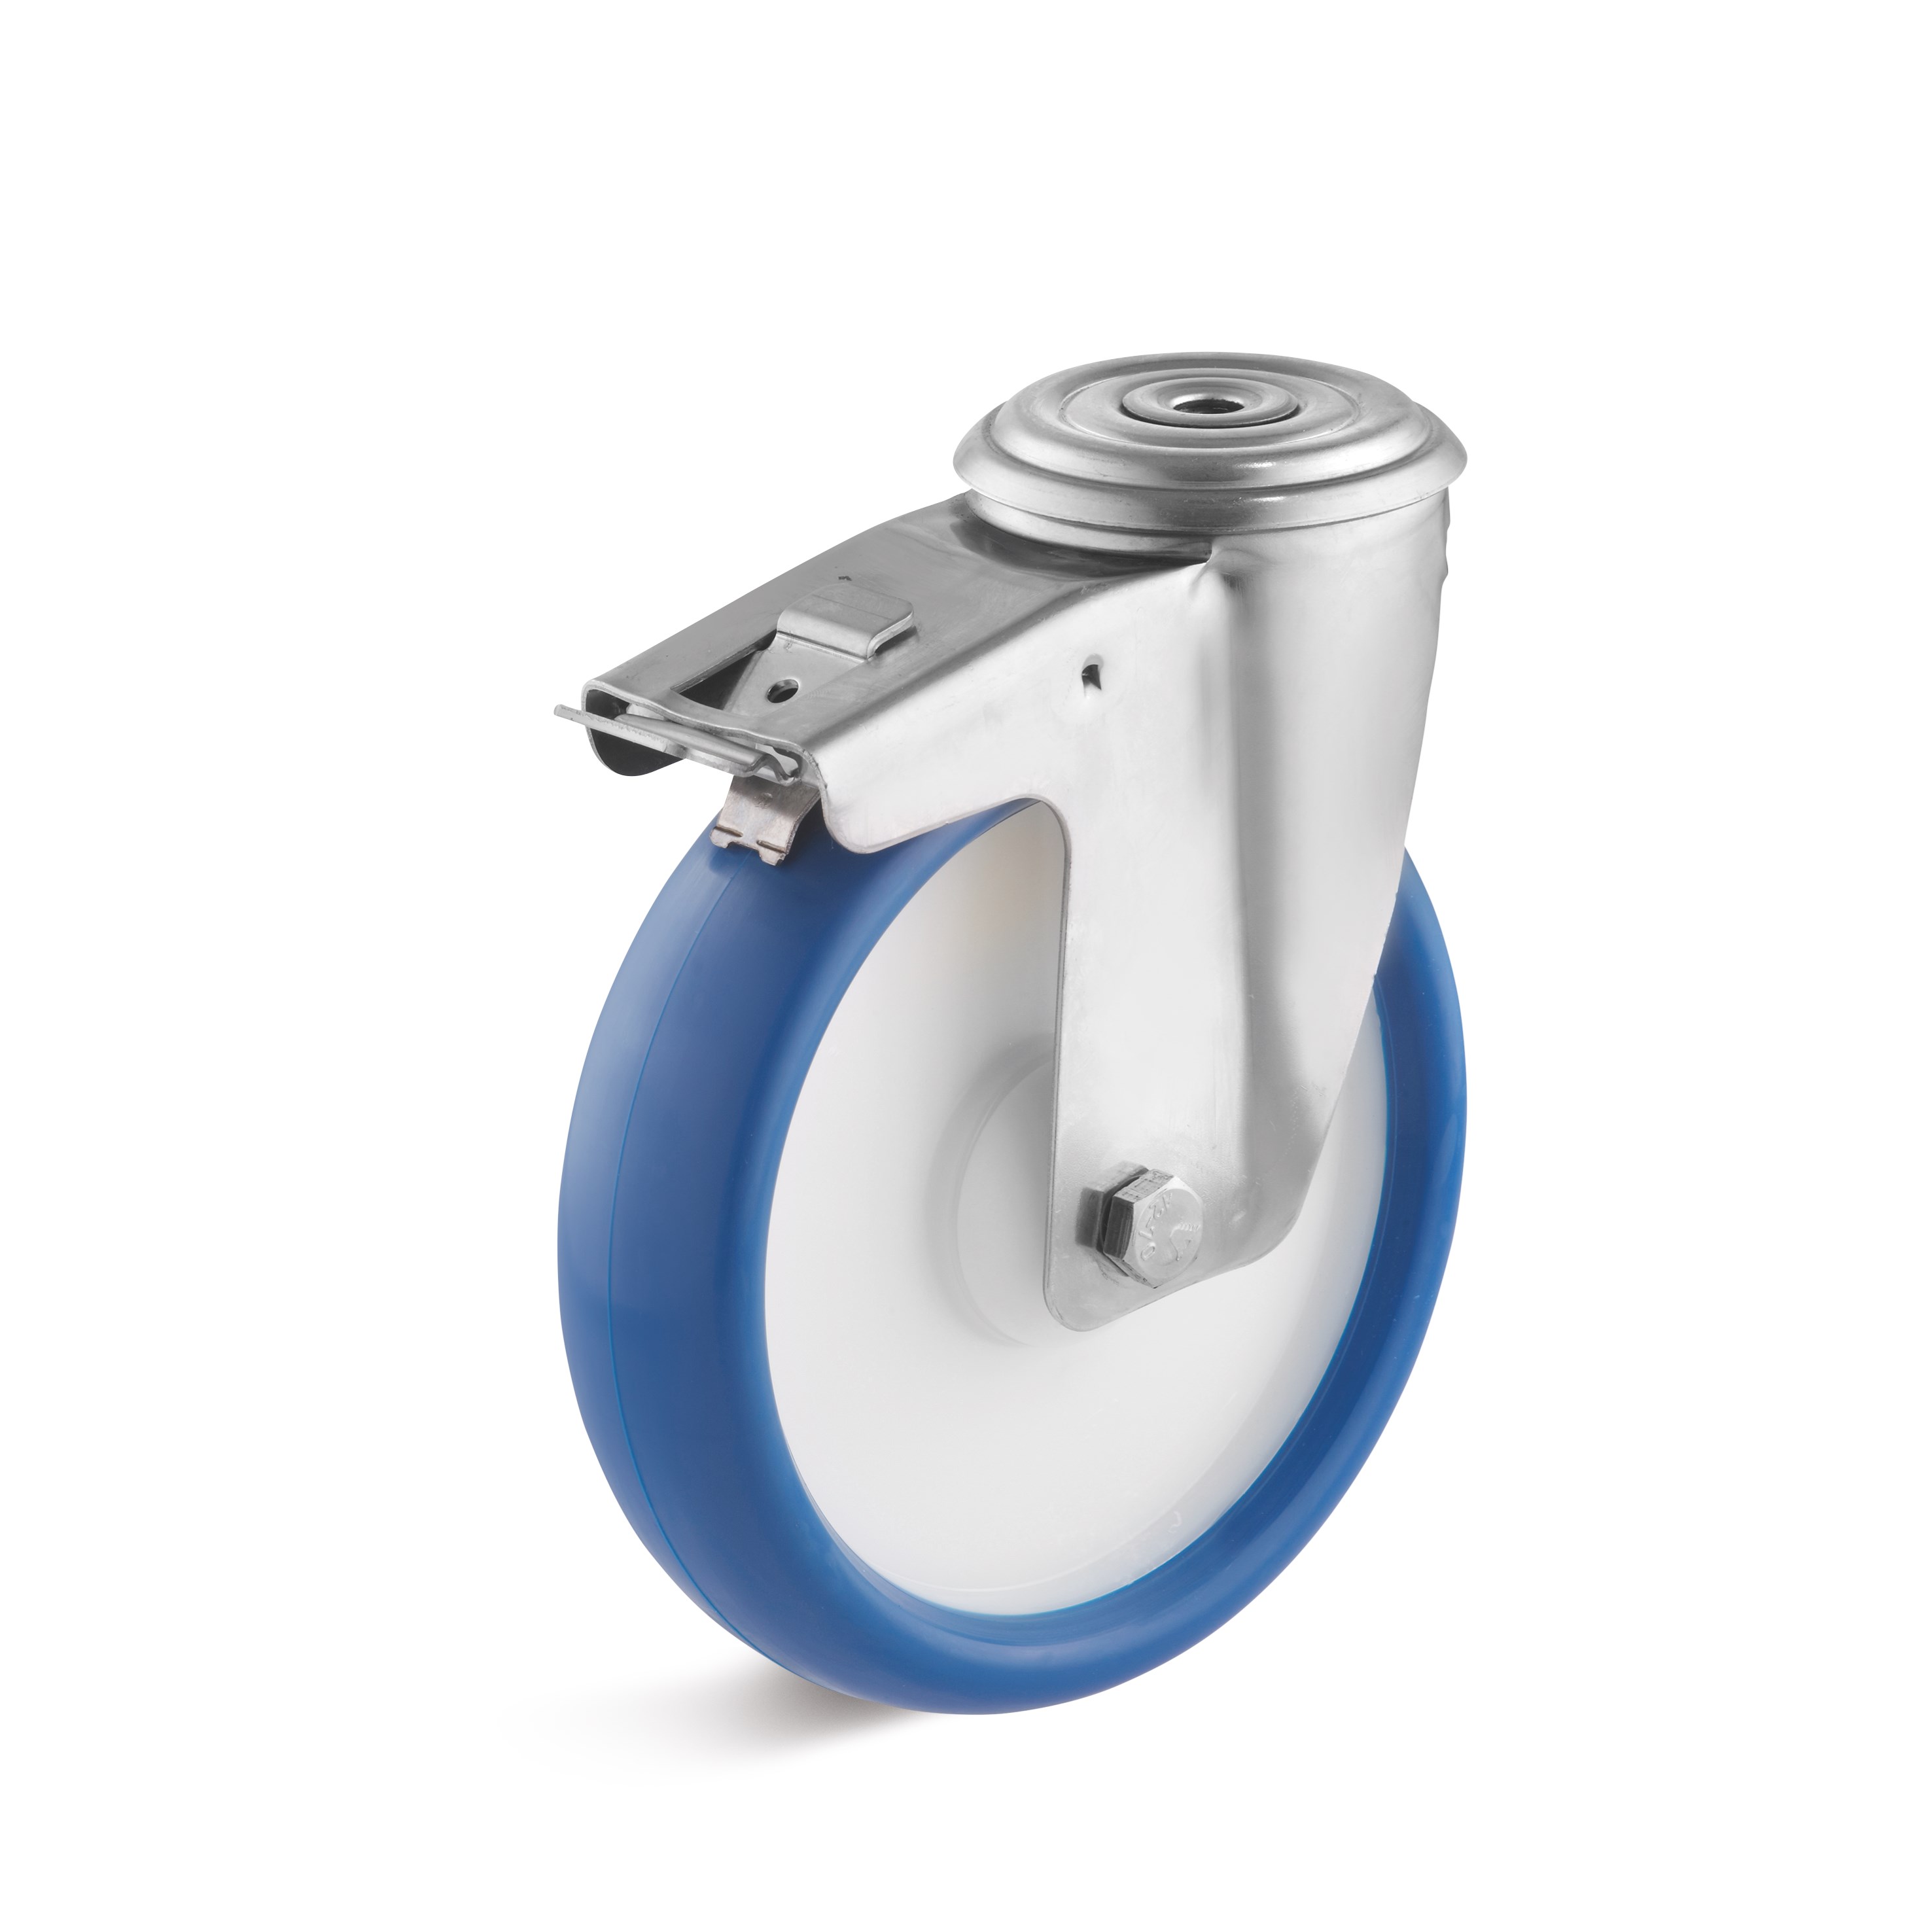 Stainless steel swivel castor with back hole attachment and double stop, polyurethane wheel L-IV-PUBK-125-K-1-DSN